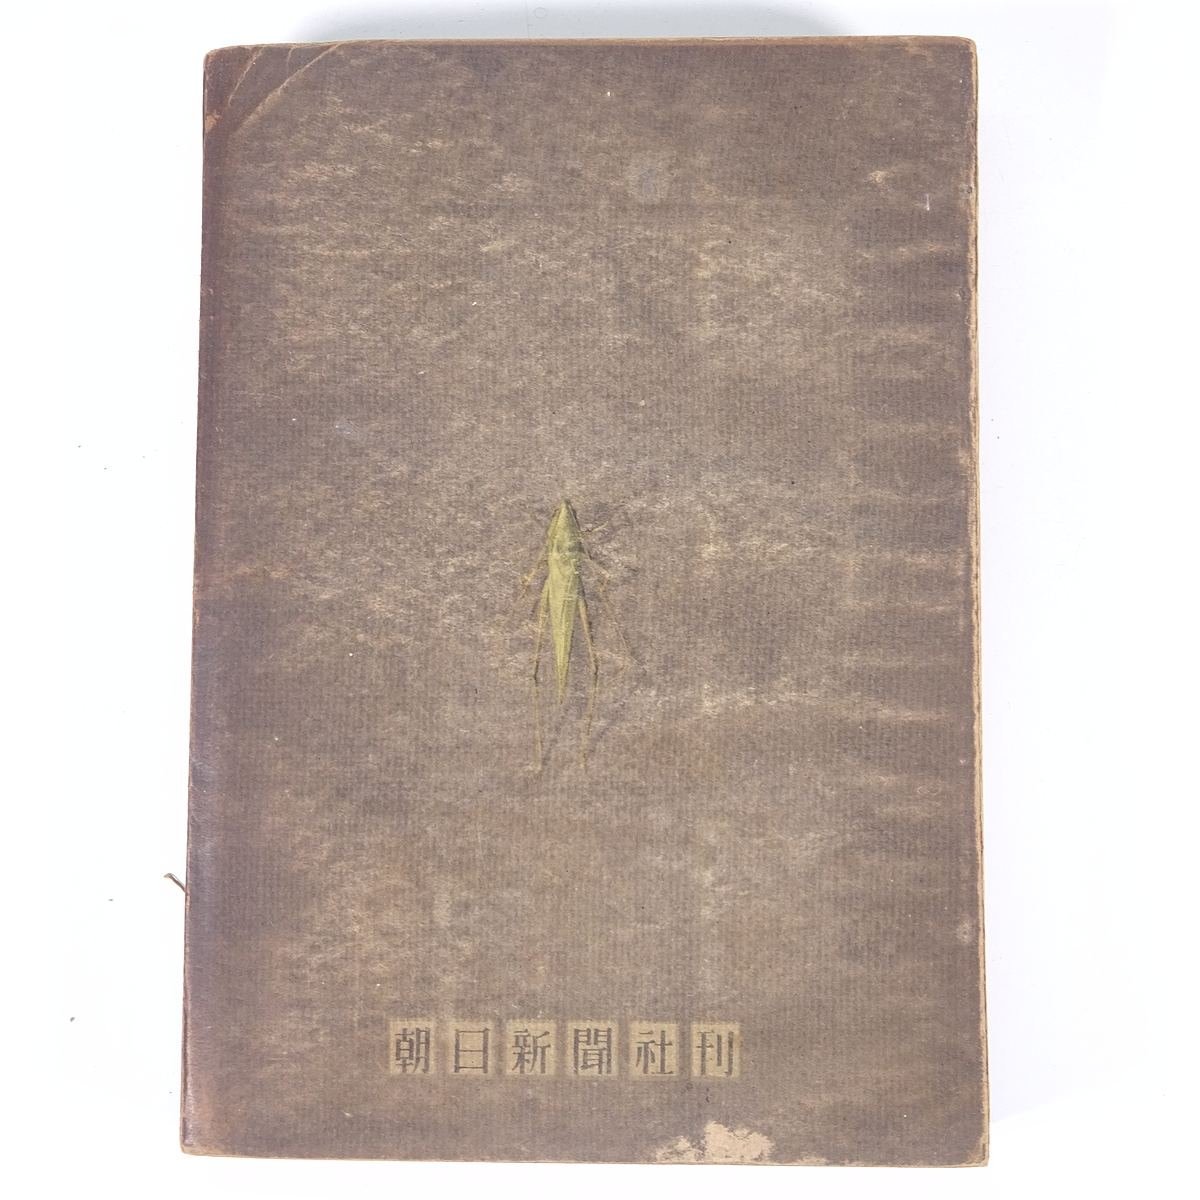  Japan insect chronicle large block writing . morning day newspaper company Showa era two three year 1948 old book separate volume miscellaneous writings .. essay insect . person * condition a little defect 